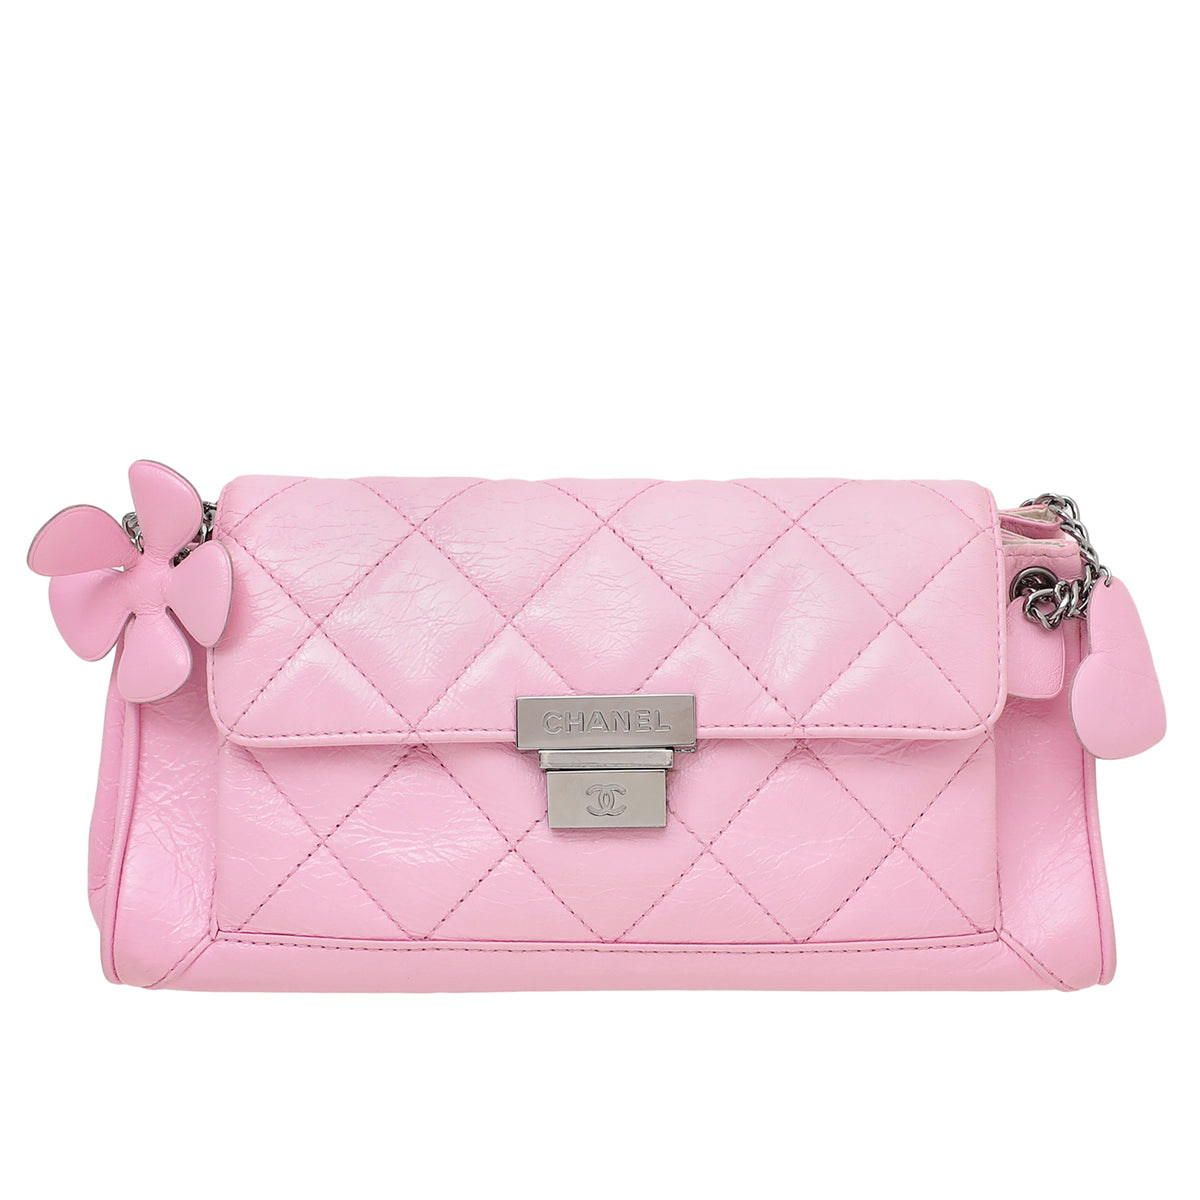 Chanel Pink CC Heart Flower Charms Accordion Bag